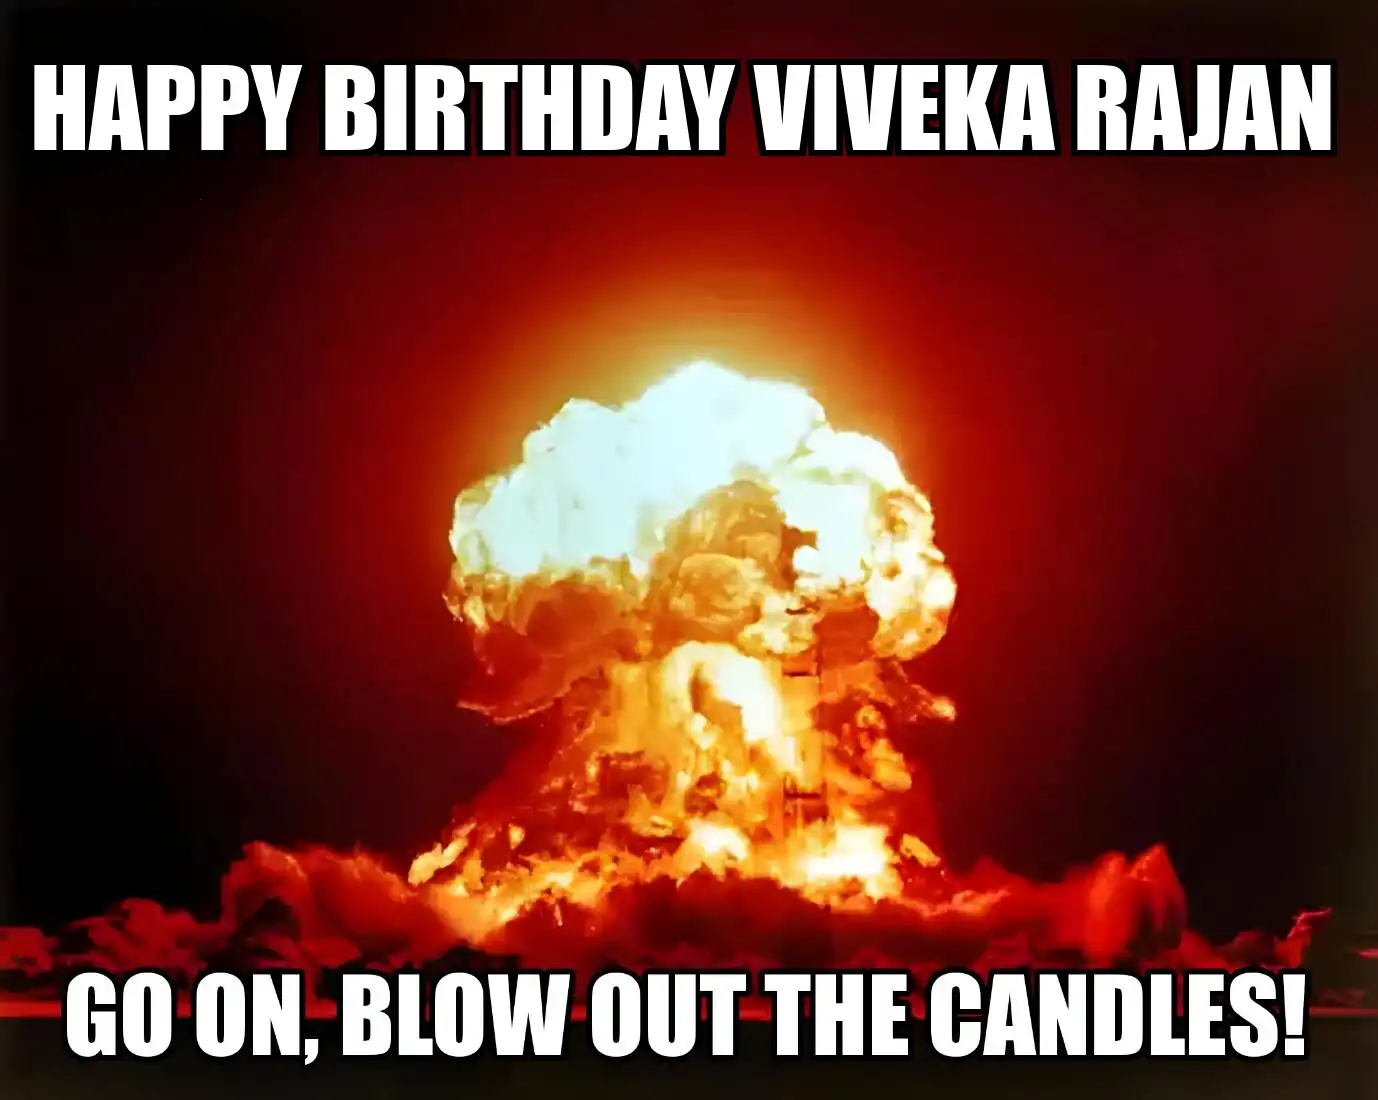 Happy Birthday Viveka rajan Go On Blow Out The Candles Meme